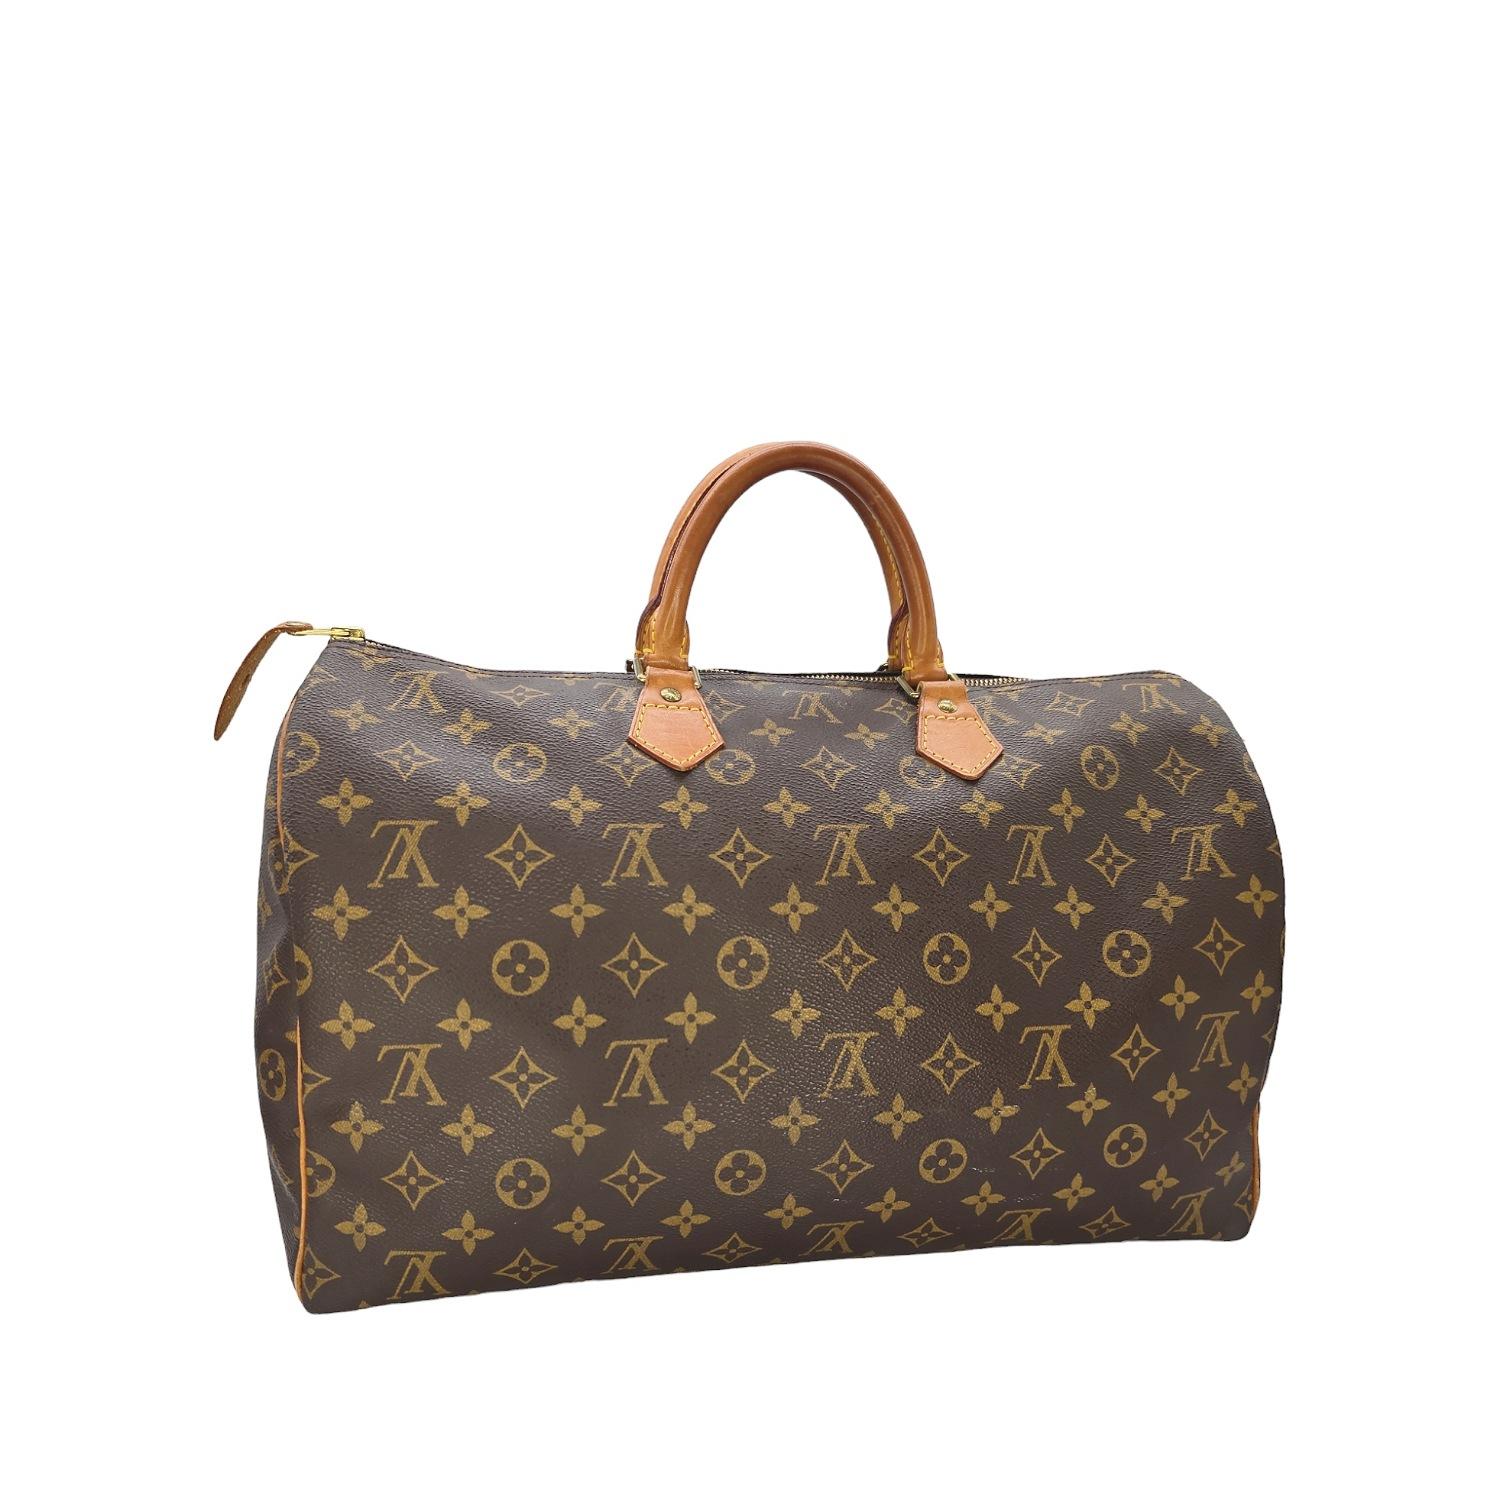 This Louis Vuitton Vintage Monogram Speedy 40 Bag is a rare and timeless piece crafted with premium materials. Made in France in 1999, it features the iconic LV monogram coated canvas and leather trim, with gold-tone hardware for a touch of luxury.